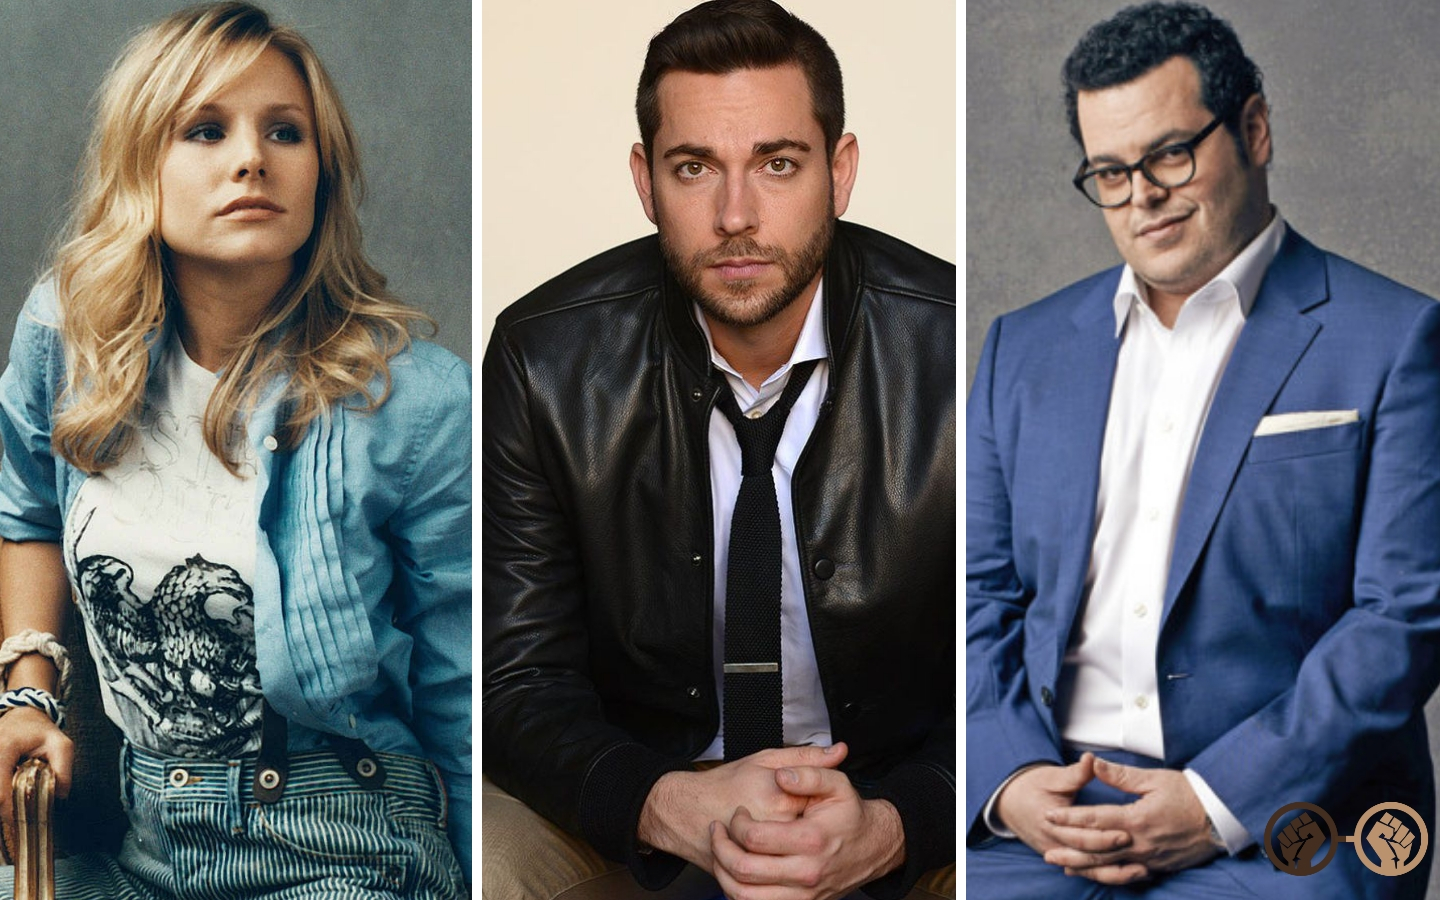 Kristen Bell, Zachary Levi and Josh Gad Lending Their Voices to ‘Kingdom Hearts III’